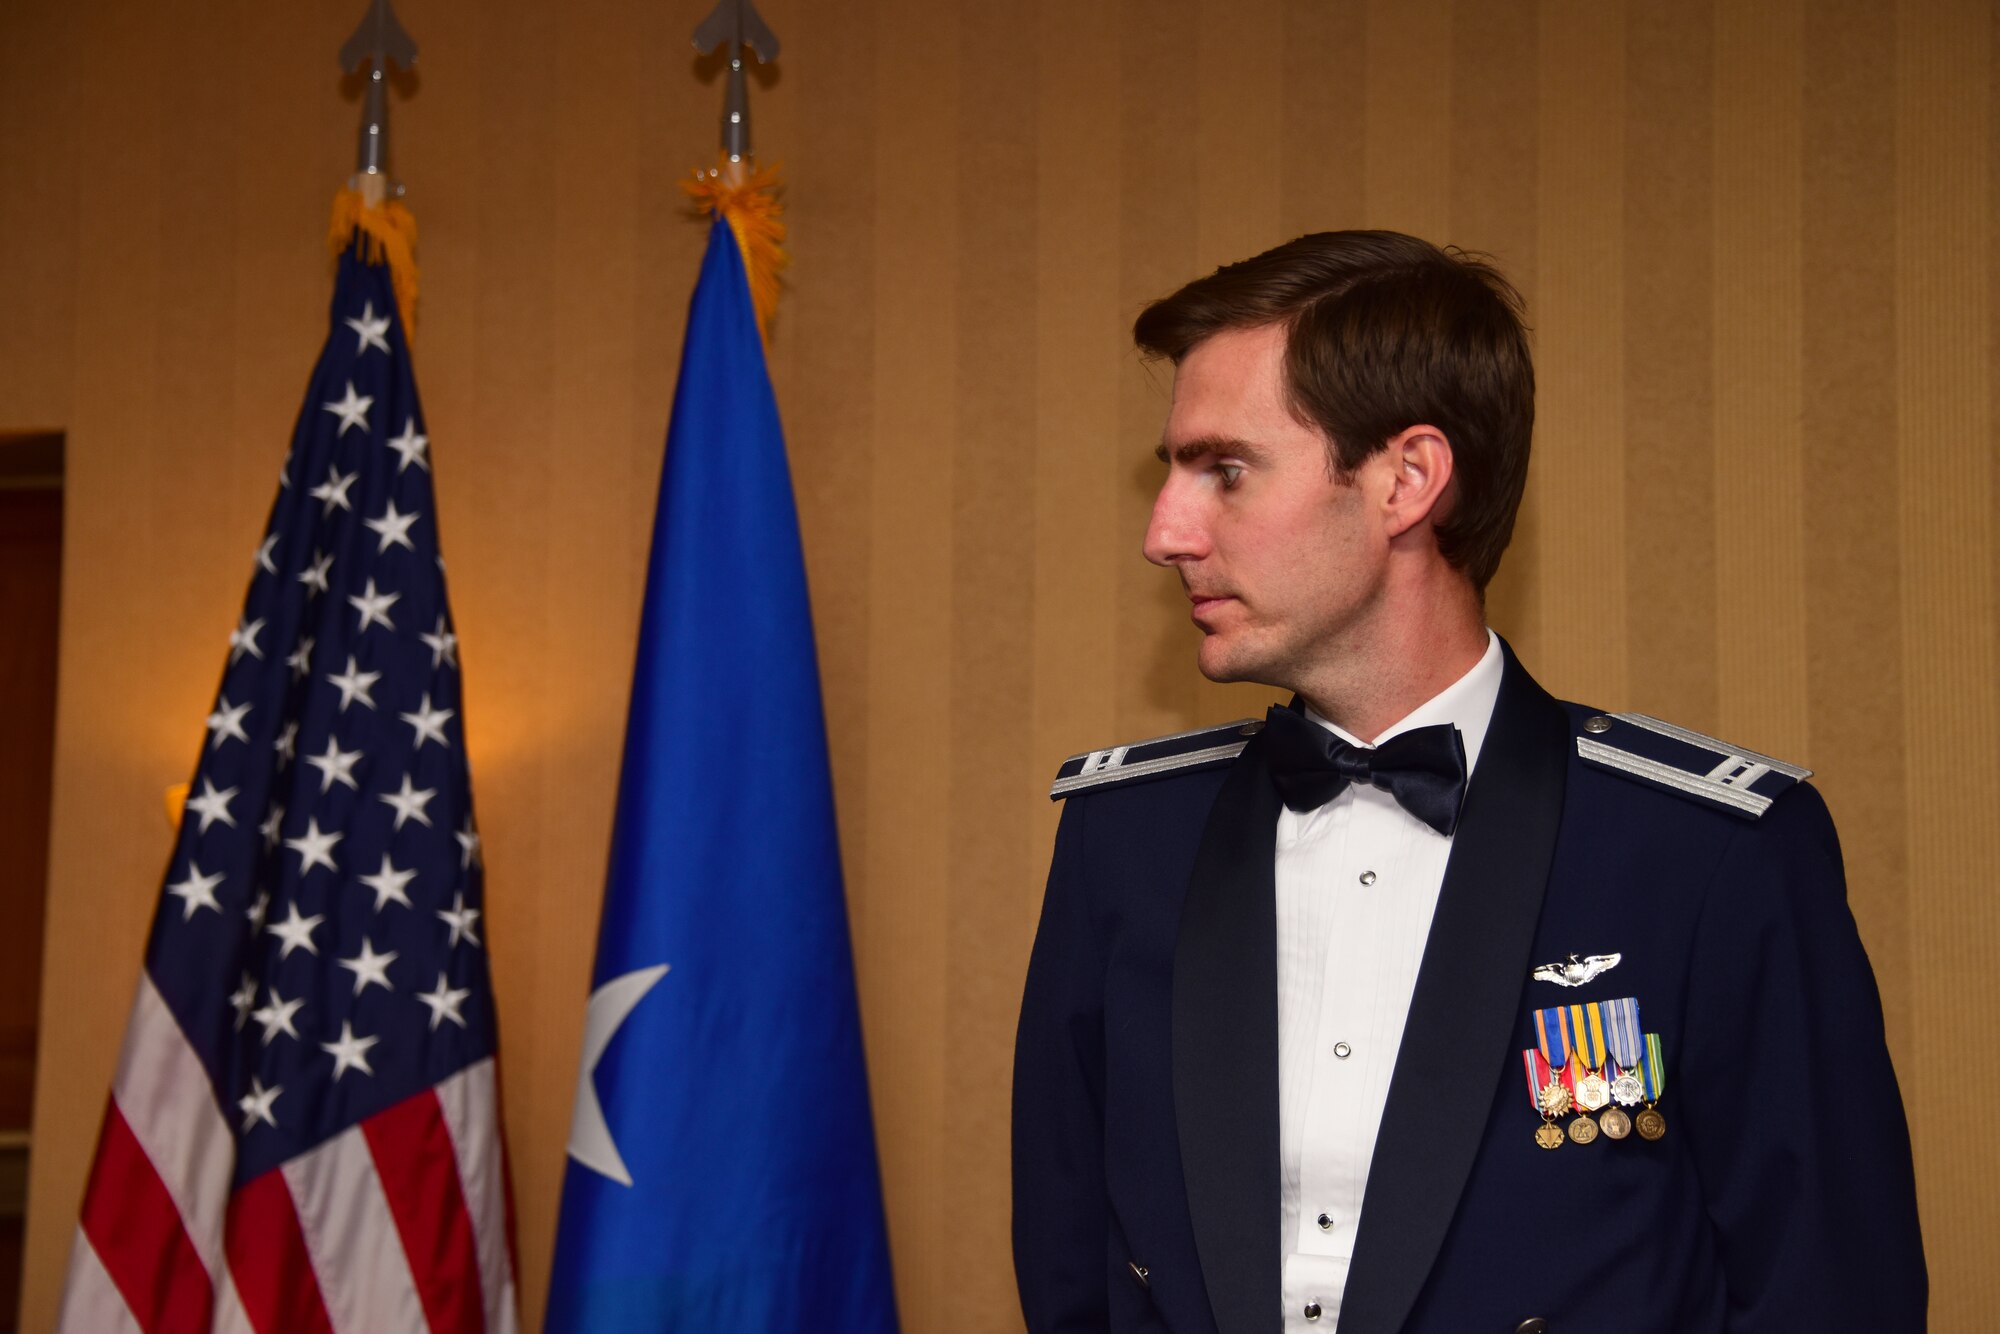 Photo of an Airman next to a U.S. and Air Force flag